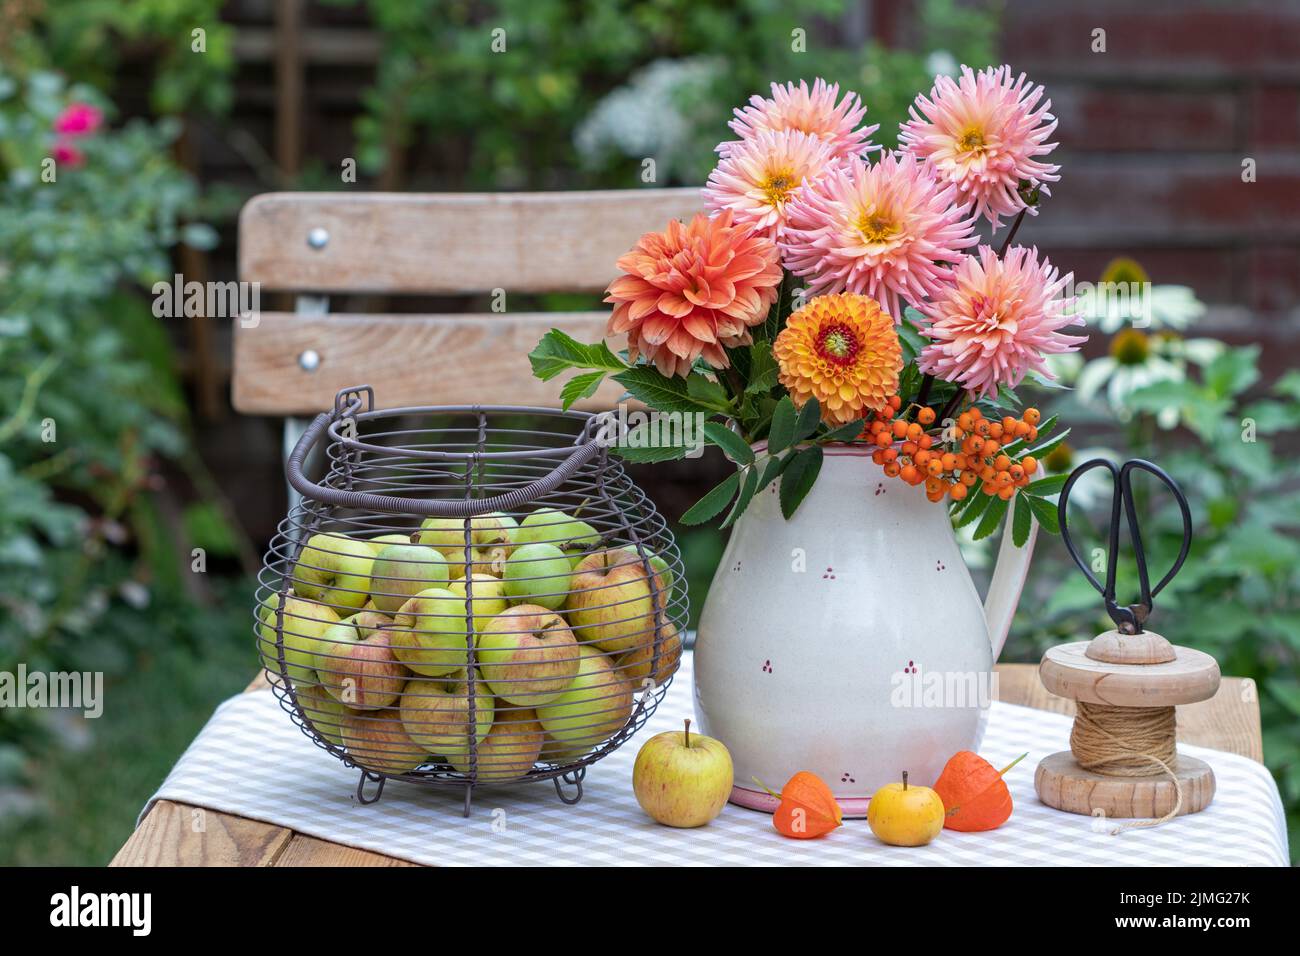 arrangement with bouquet of orange dahlias and apples in basket Stock Photo